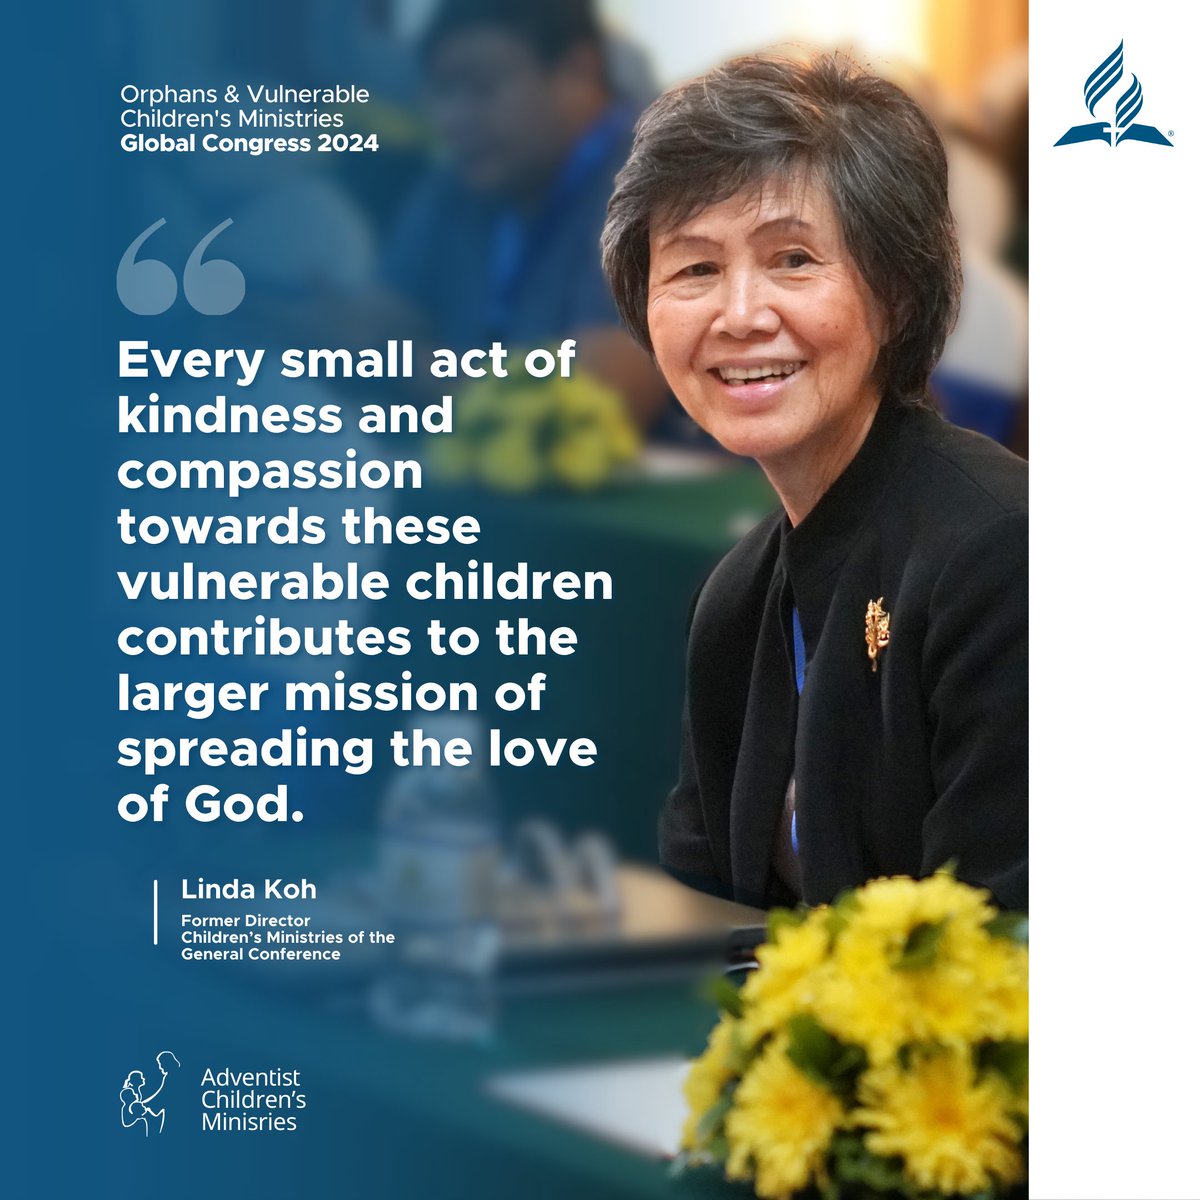 Nurturing #vulnerablechildren through #discipleship and #kindness reflects God's love and fulfills Christ's command. 
Stay committed to your #mission. #globalophans #children #GlobalOVC24 #OVCMinistriesCongress24